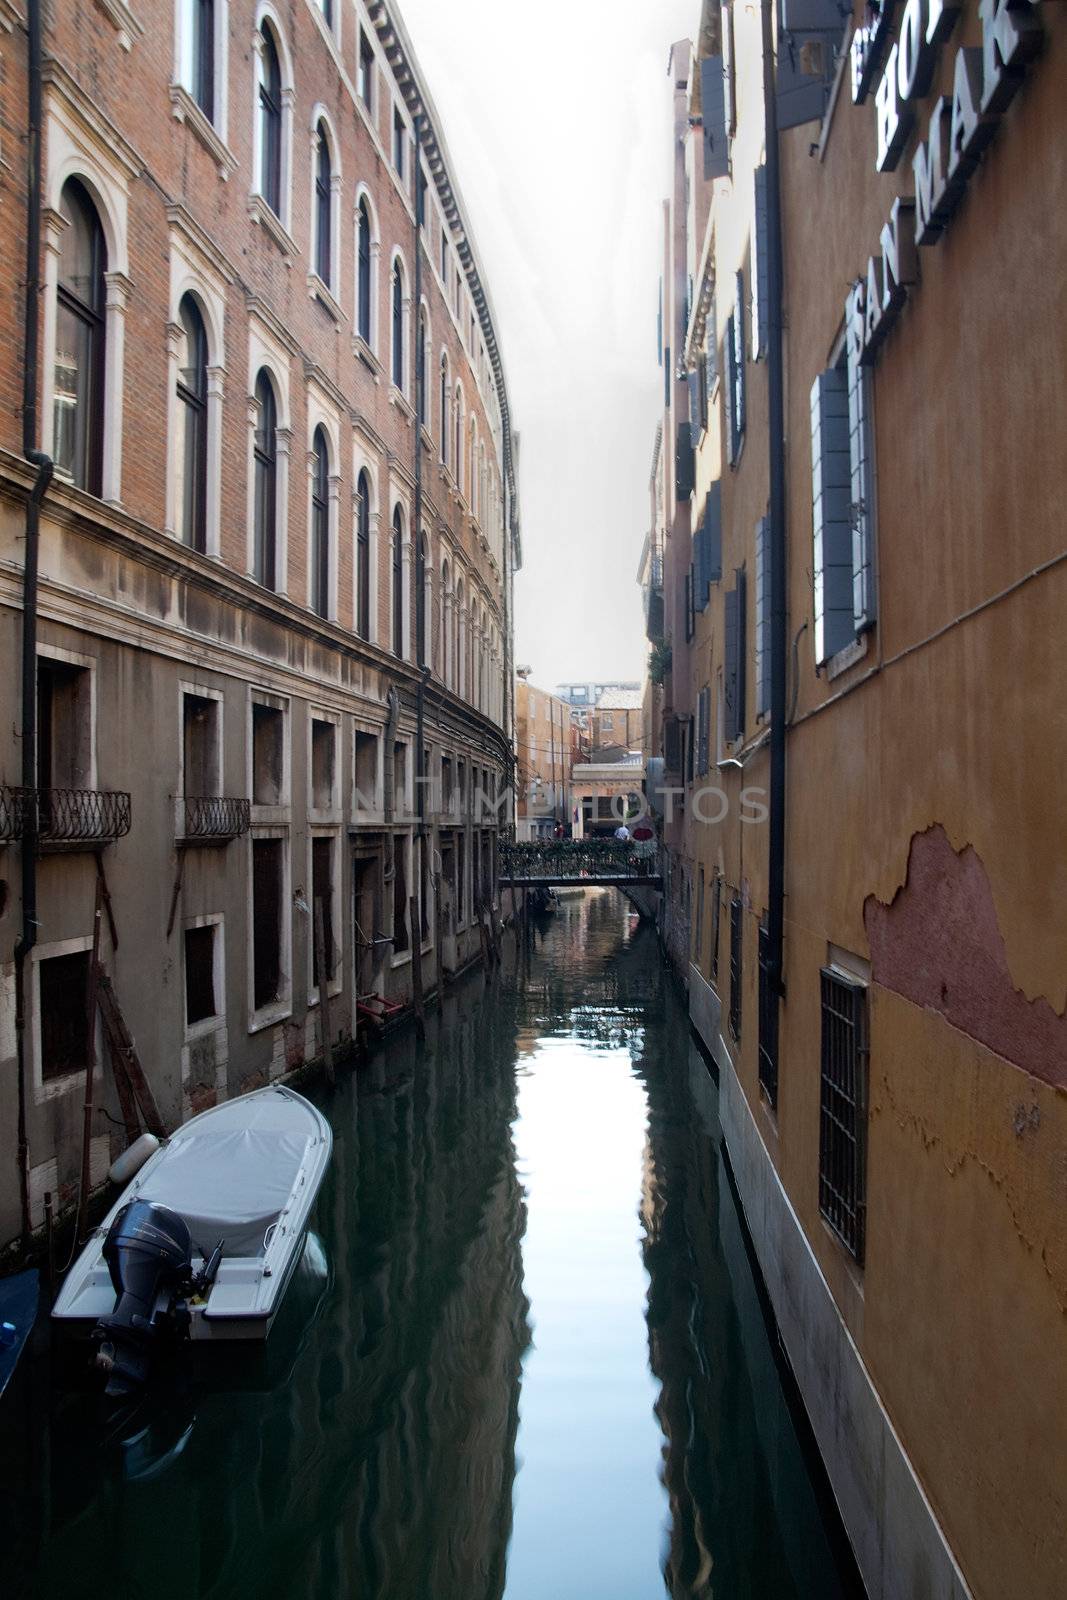 A back water alley in the city of Venice